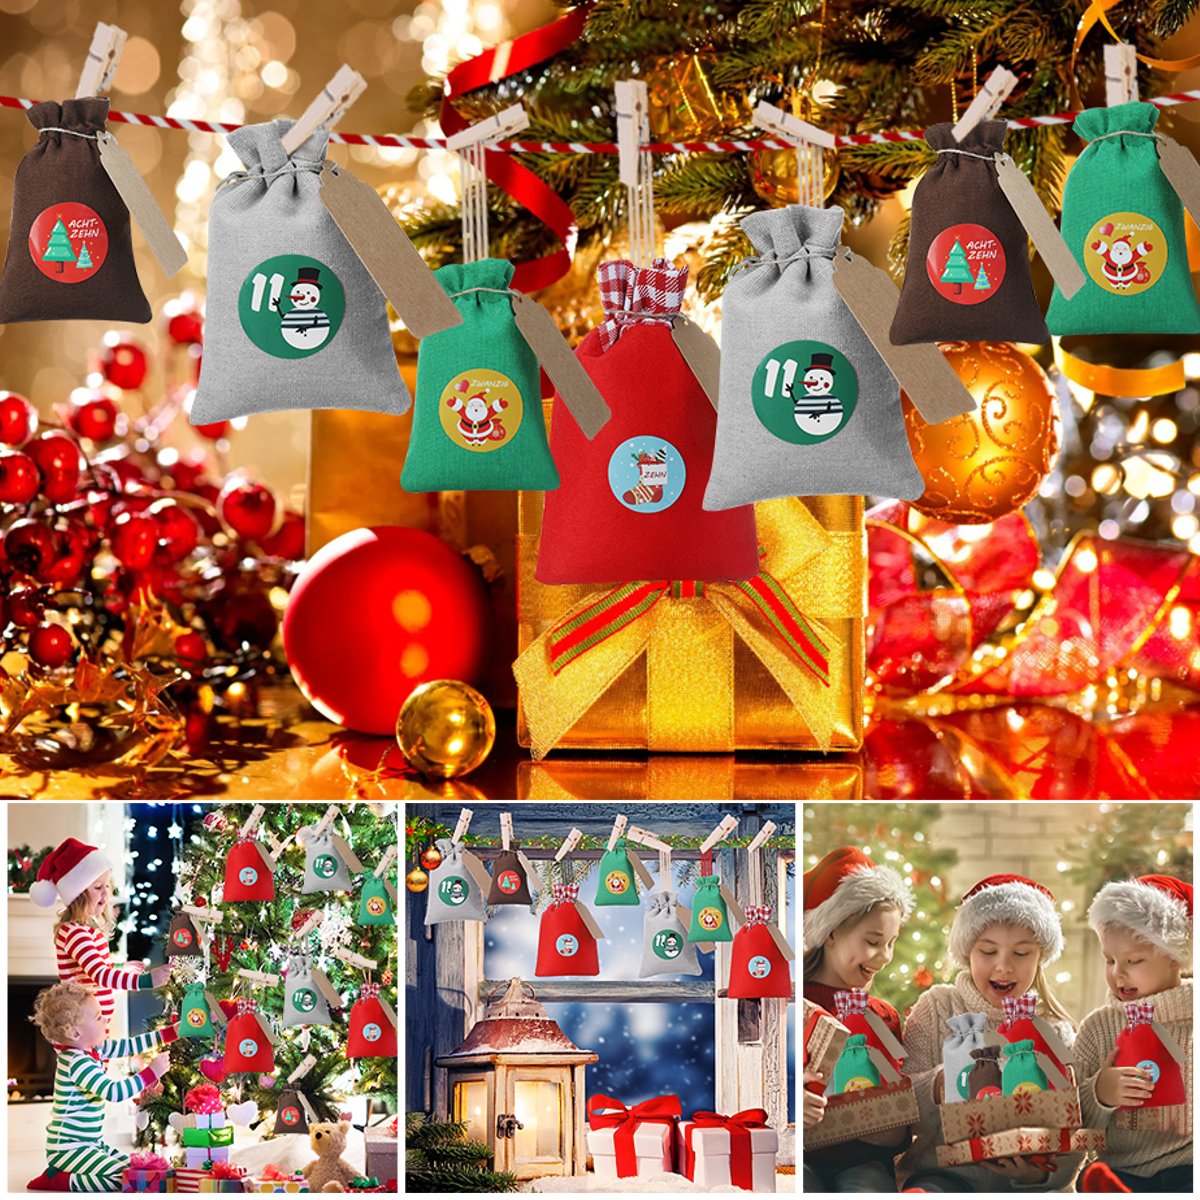 JOYXEON-28PCS-Christmas-Hanging-Advent-Calendars-Countdown-Drawstring-Gift-Bags-Candy-Biscuit-Pouche-1896442-7